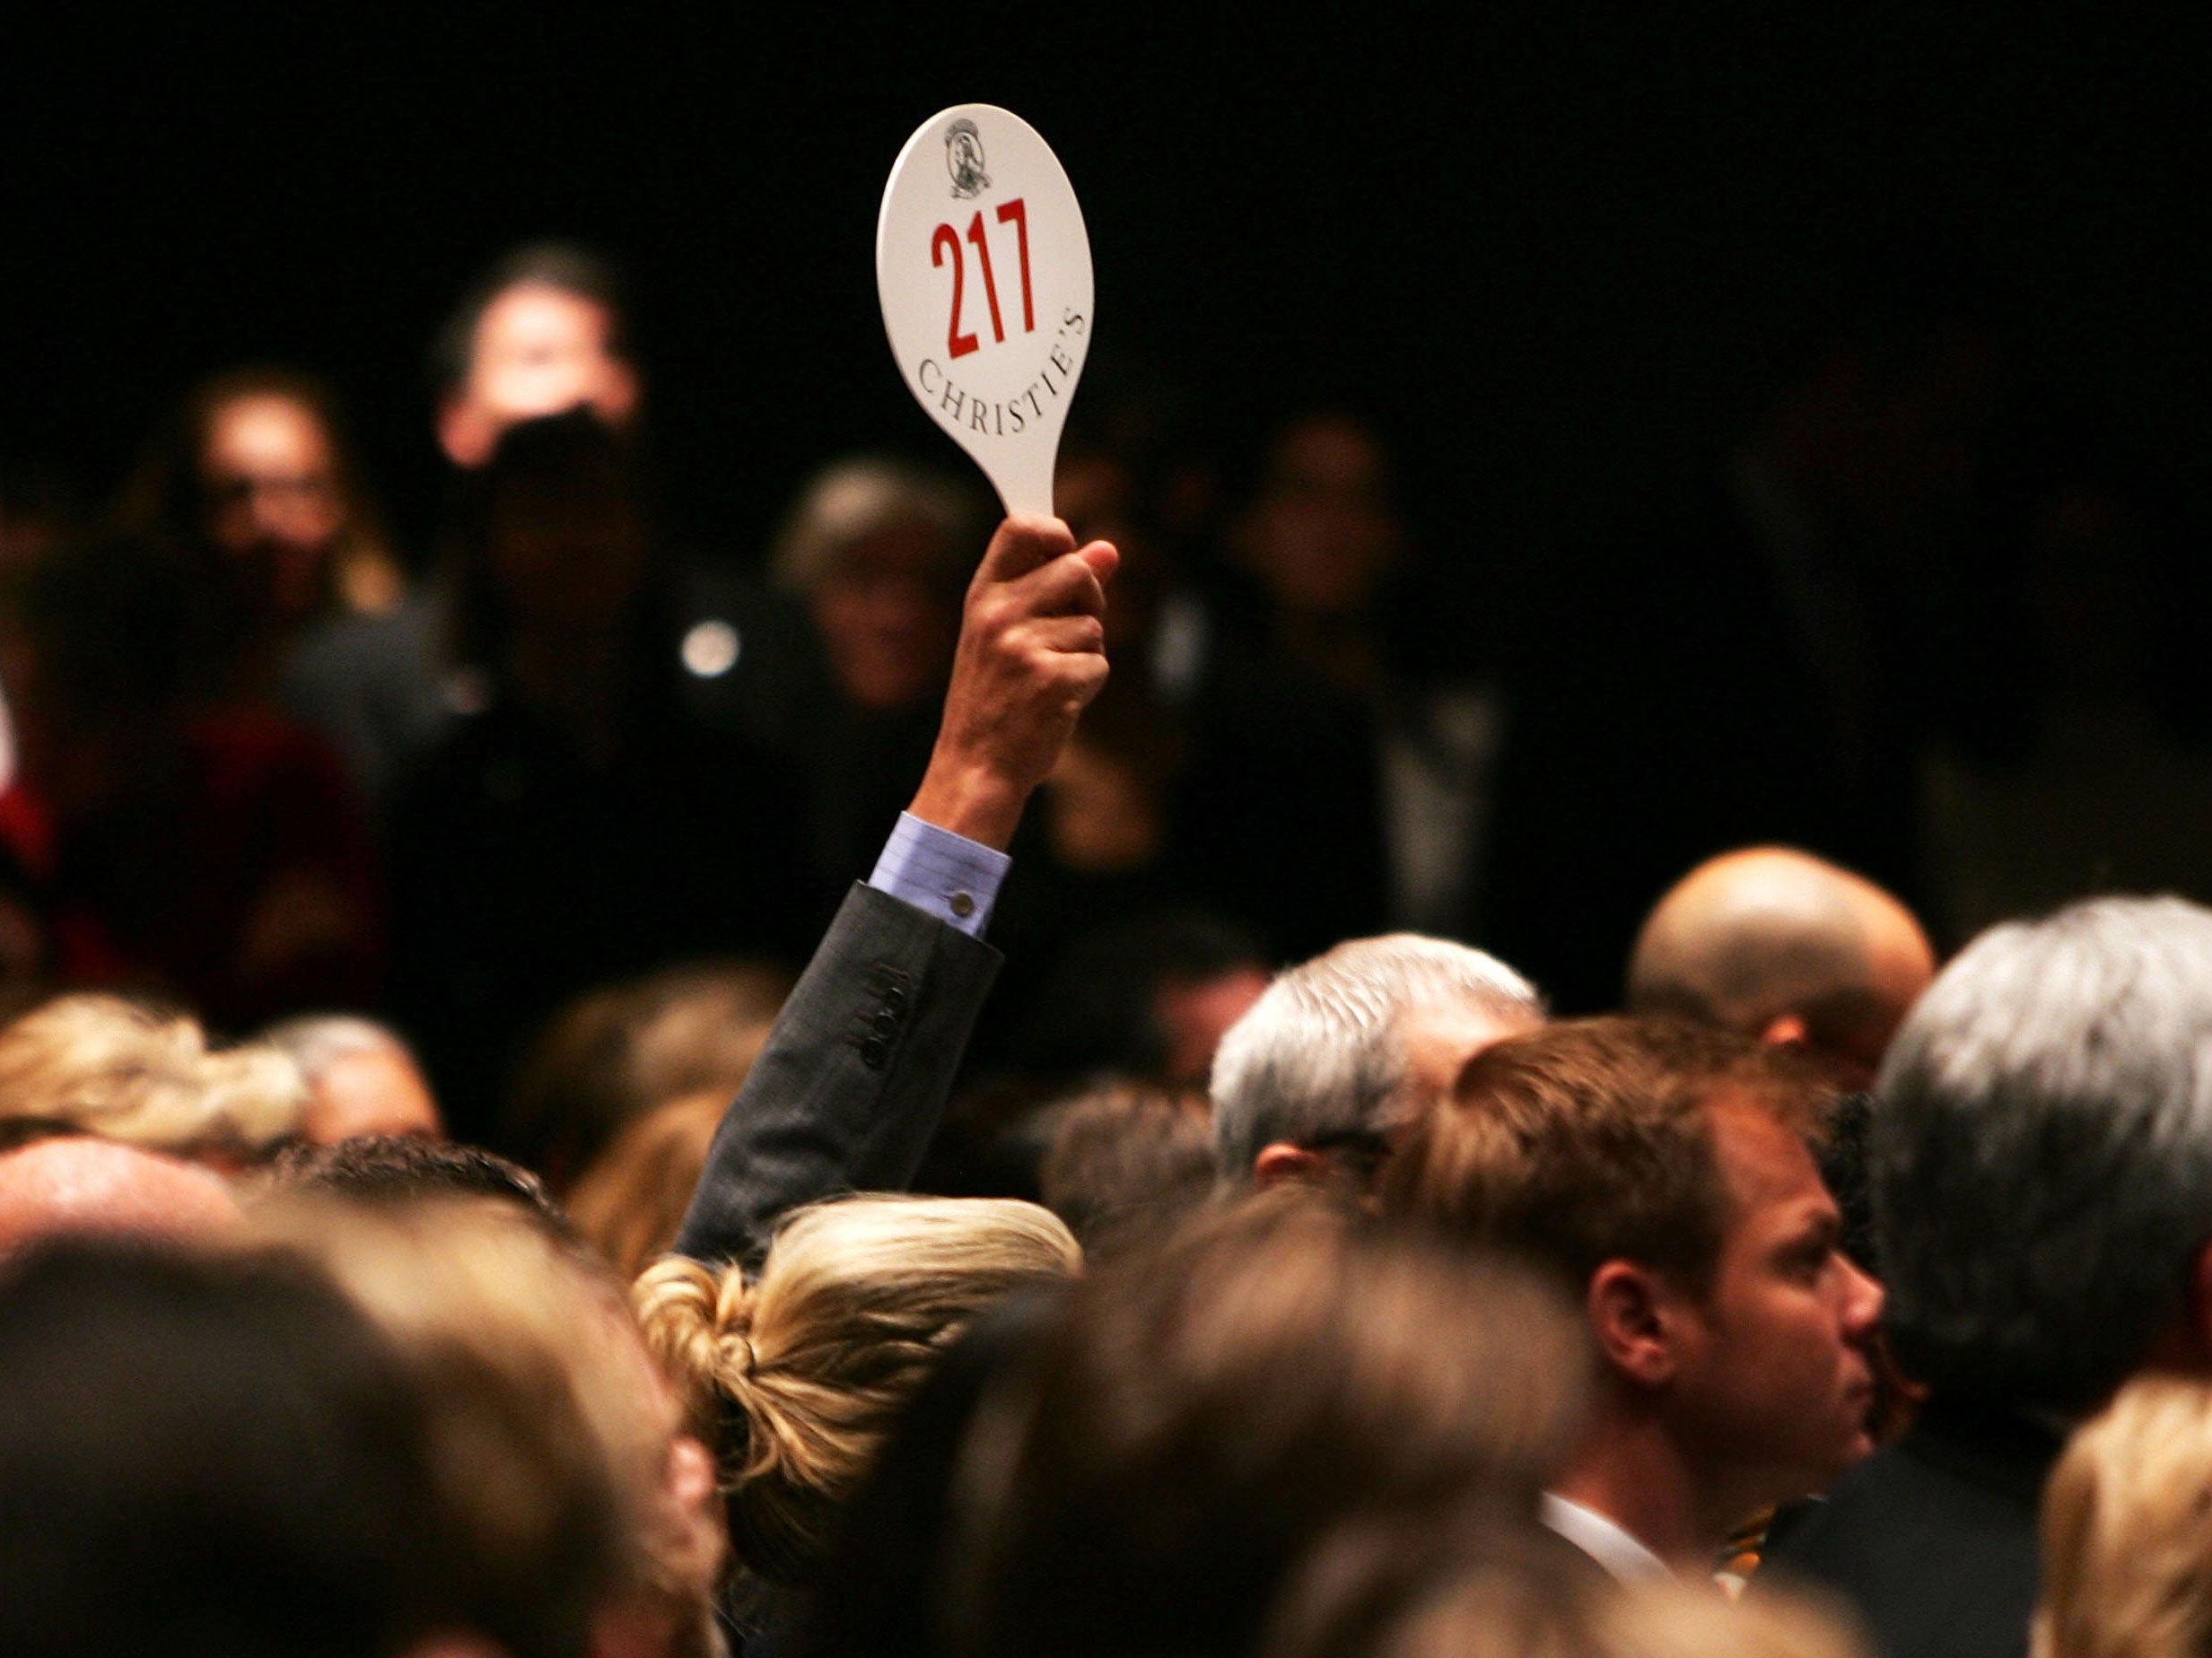 A man bids at an auction at Christie's in New York, which was not involved in the French scandal